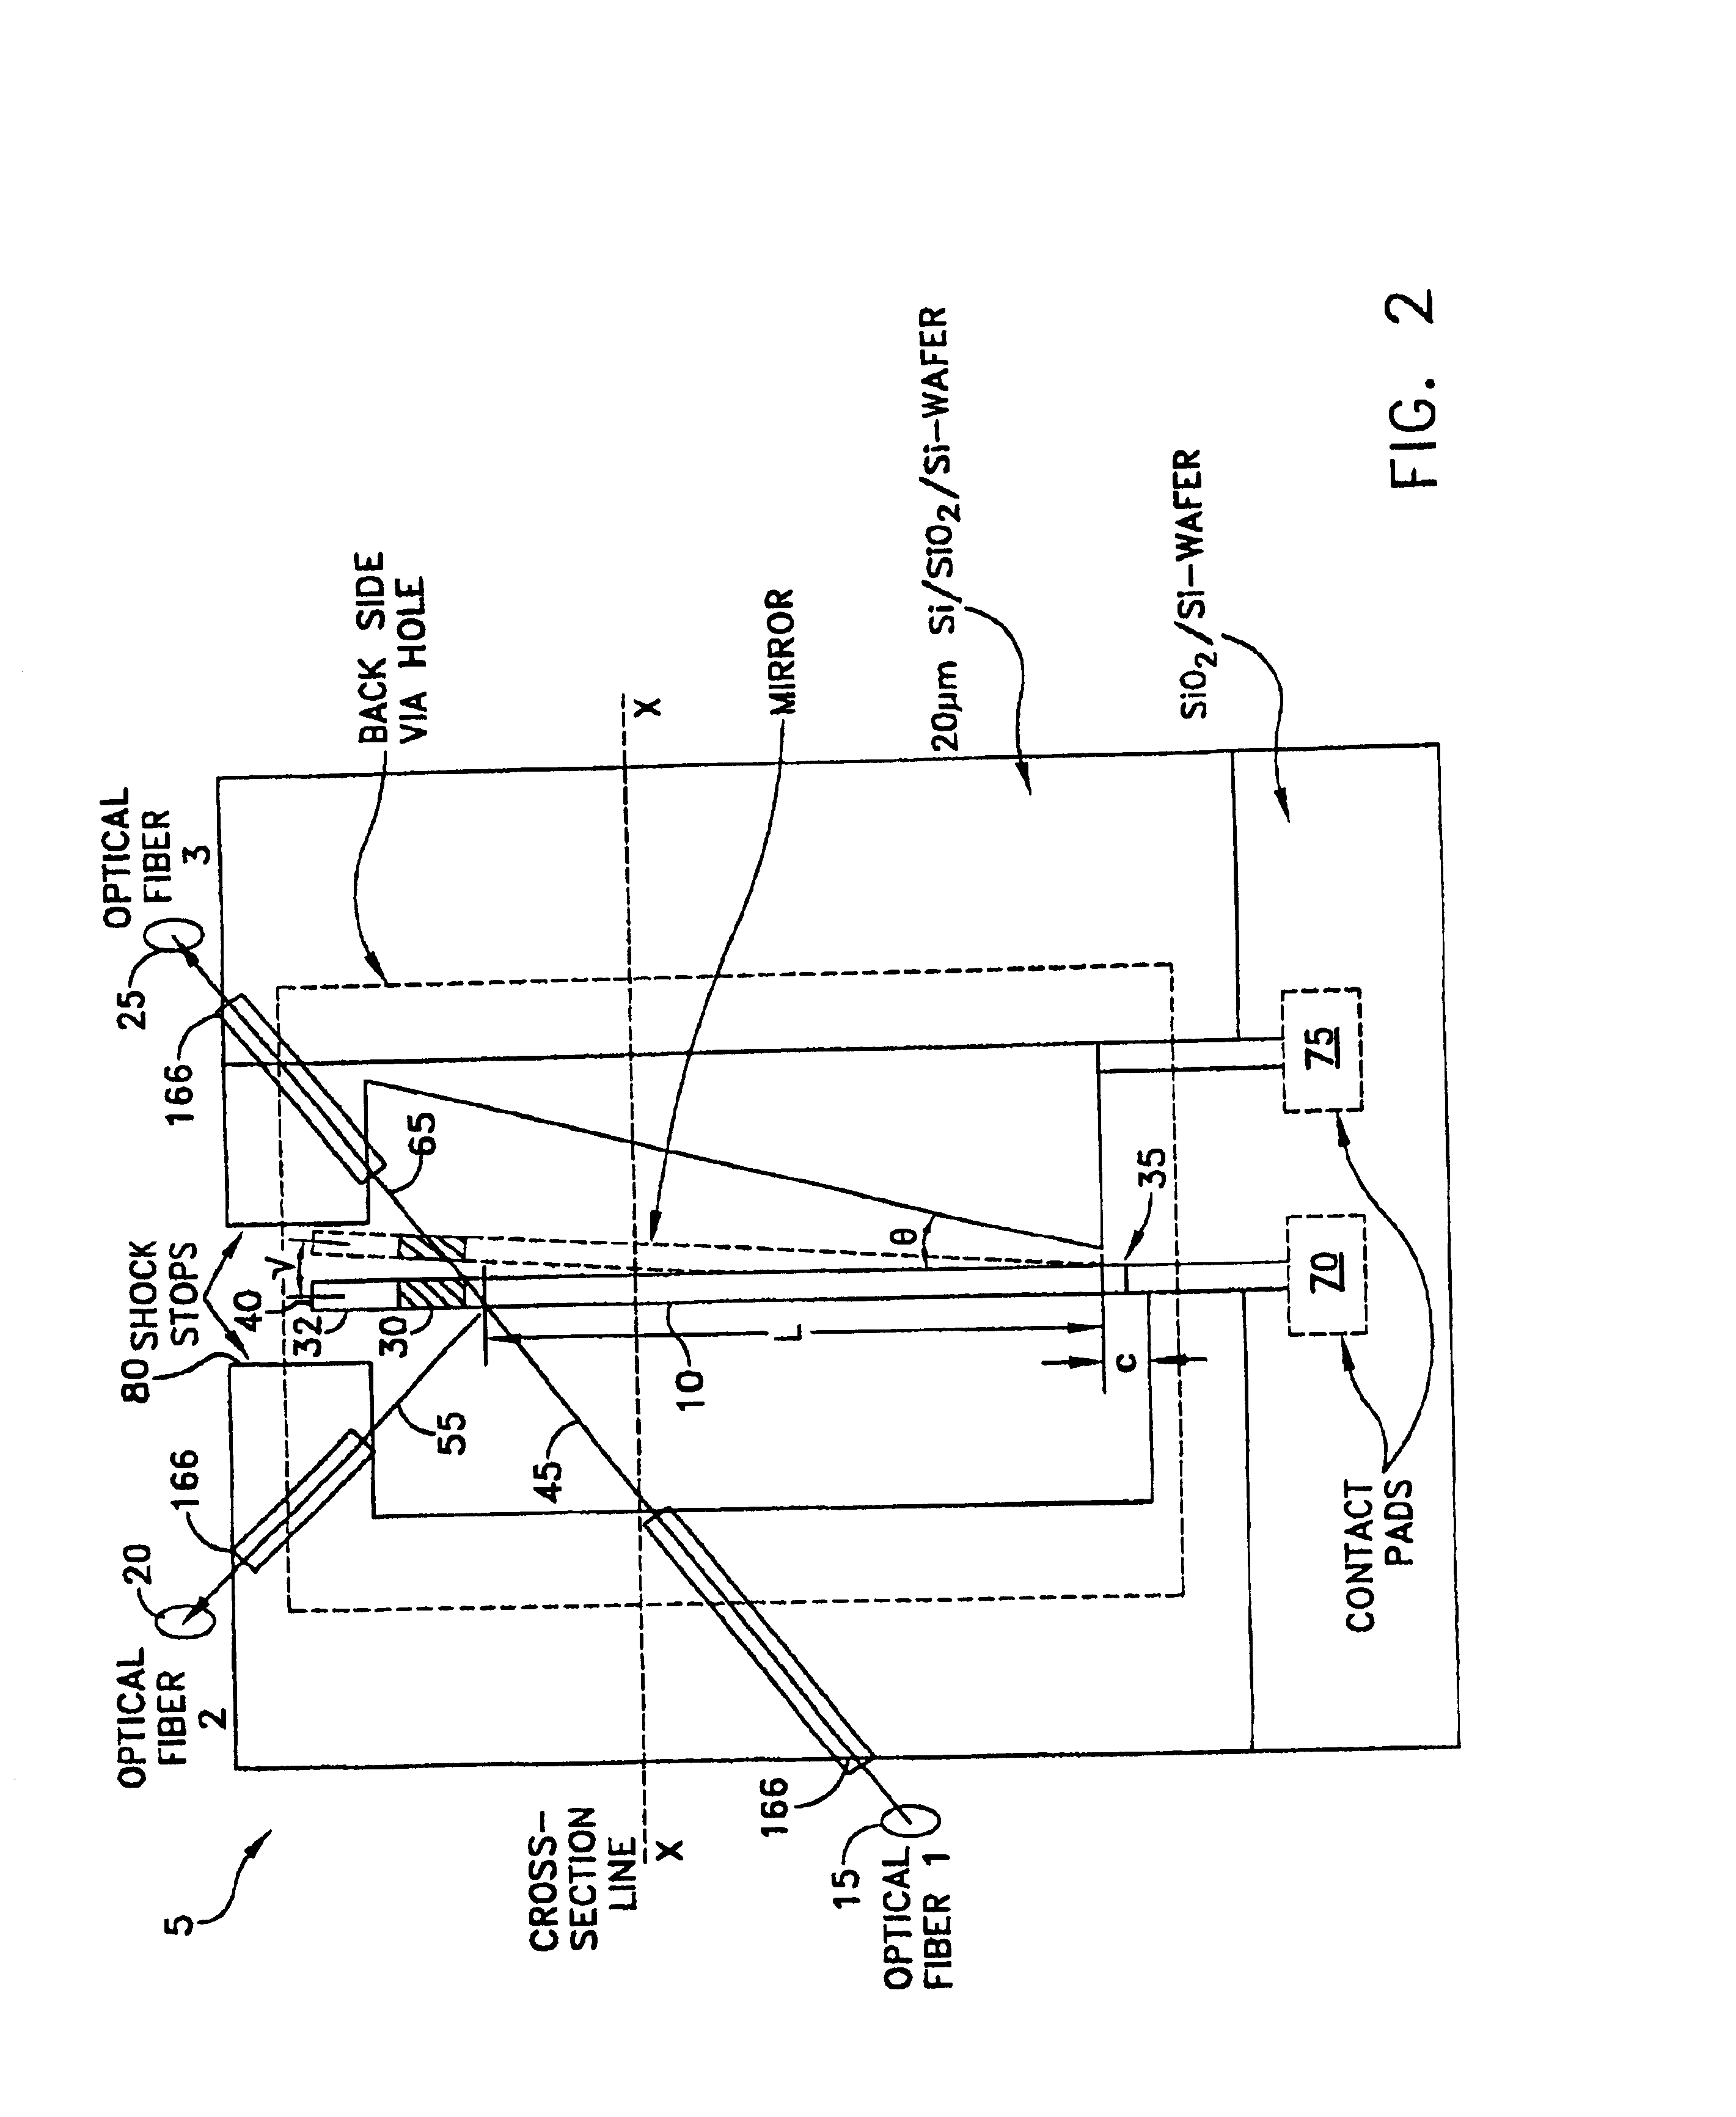 Switch-variable optical attenuator and switch arrays